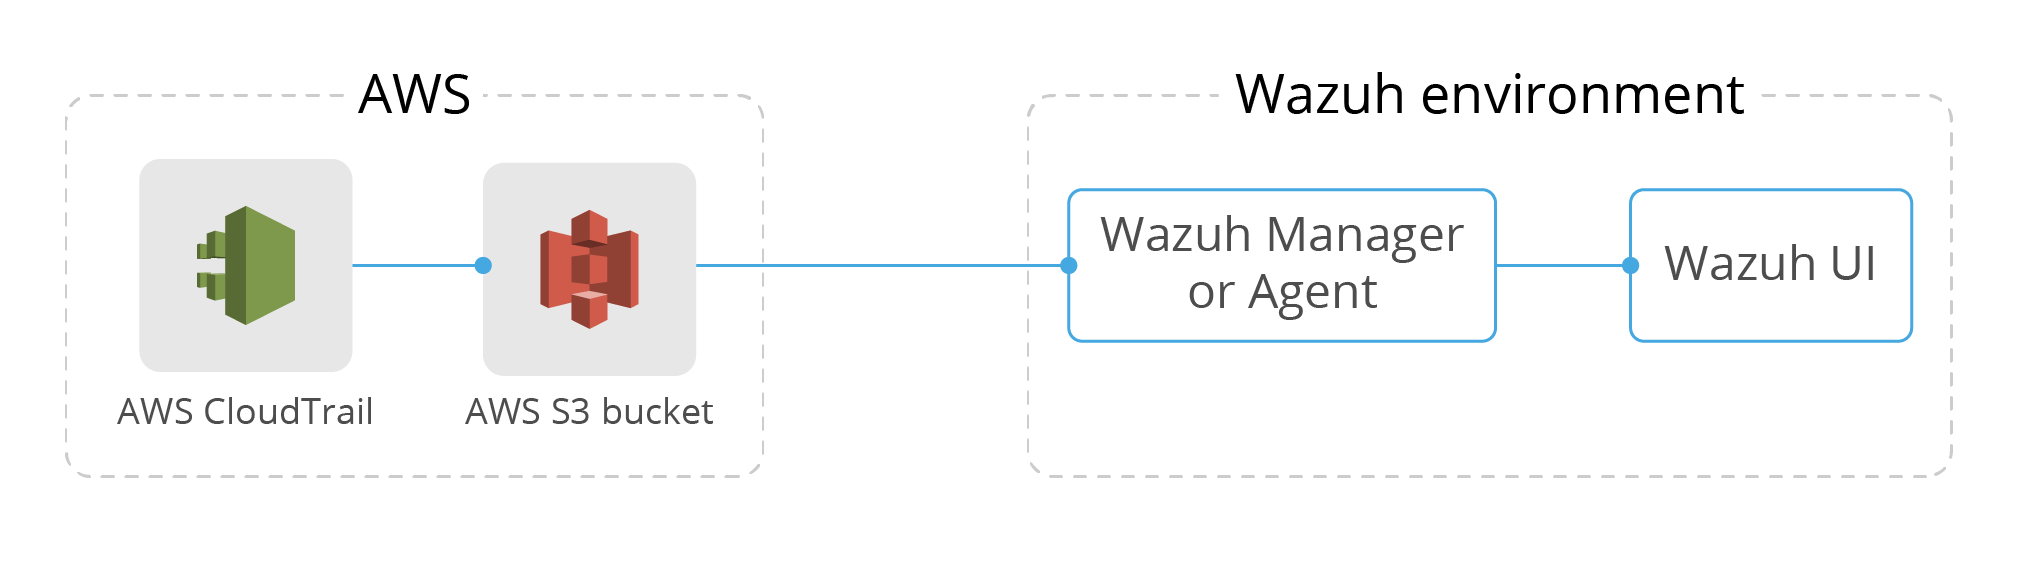 Monitor AWS activity with AWS Cloudtrail and Wazuh